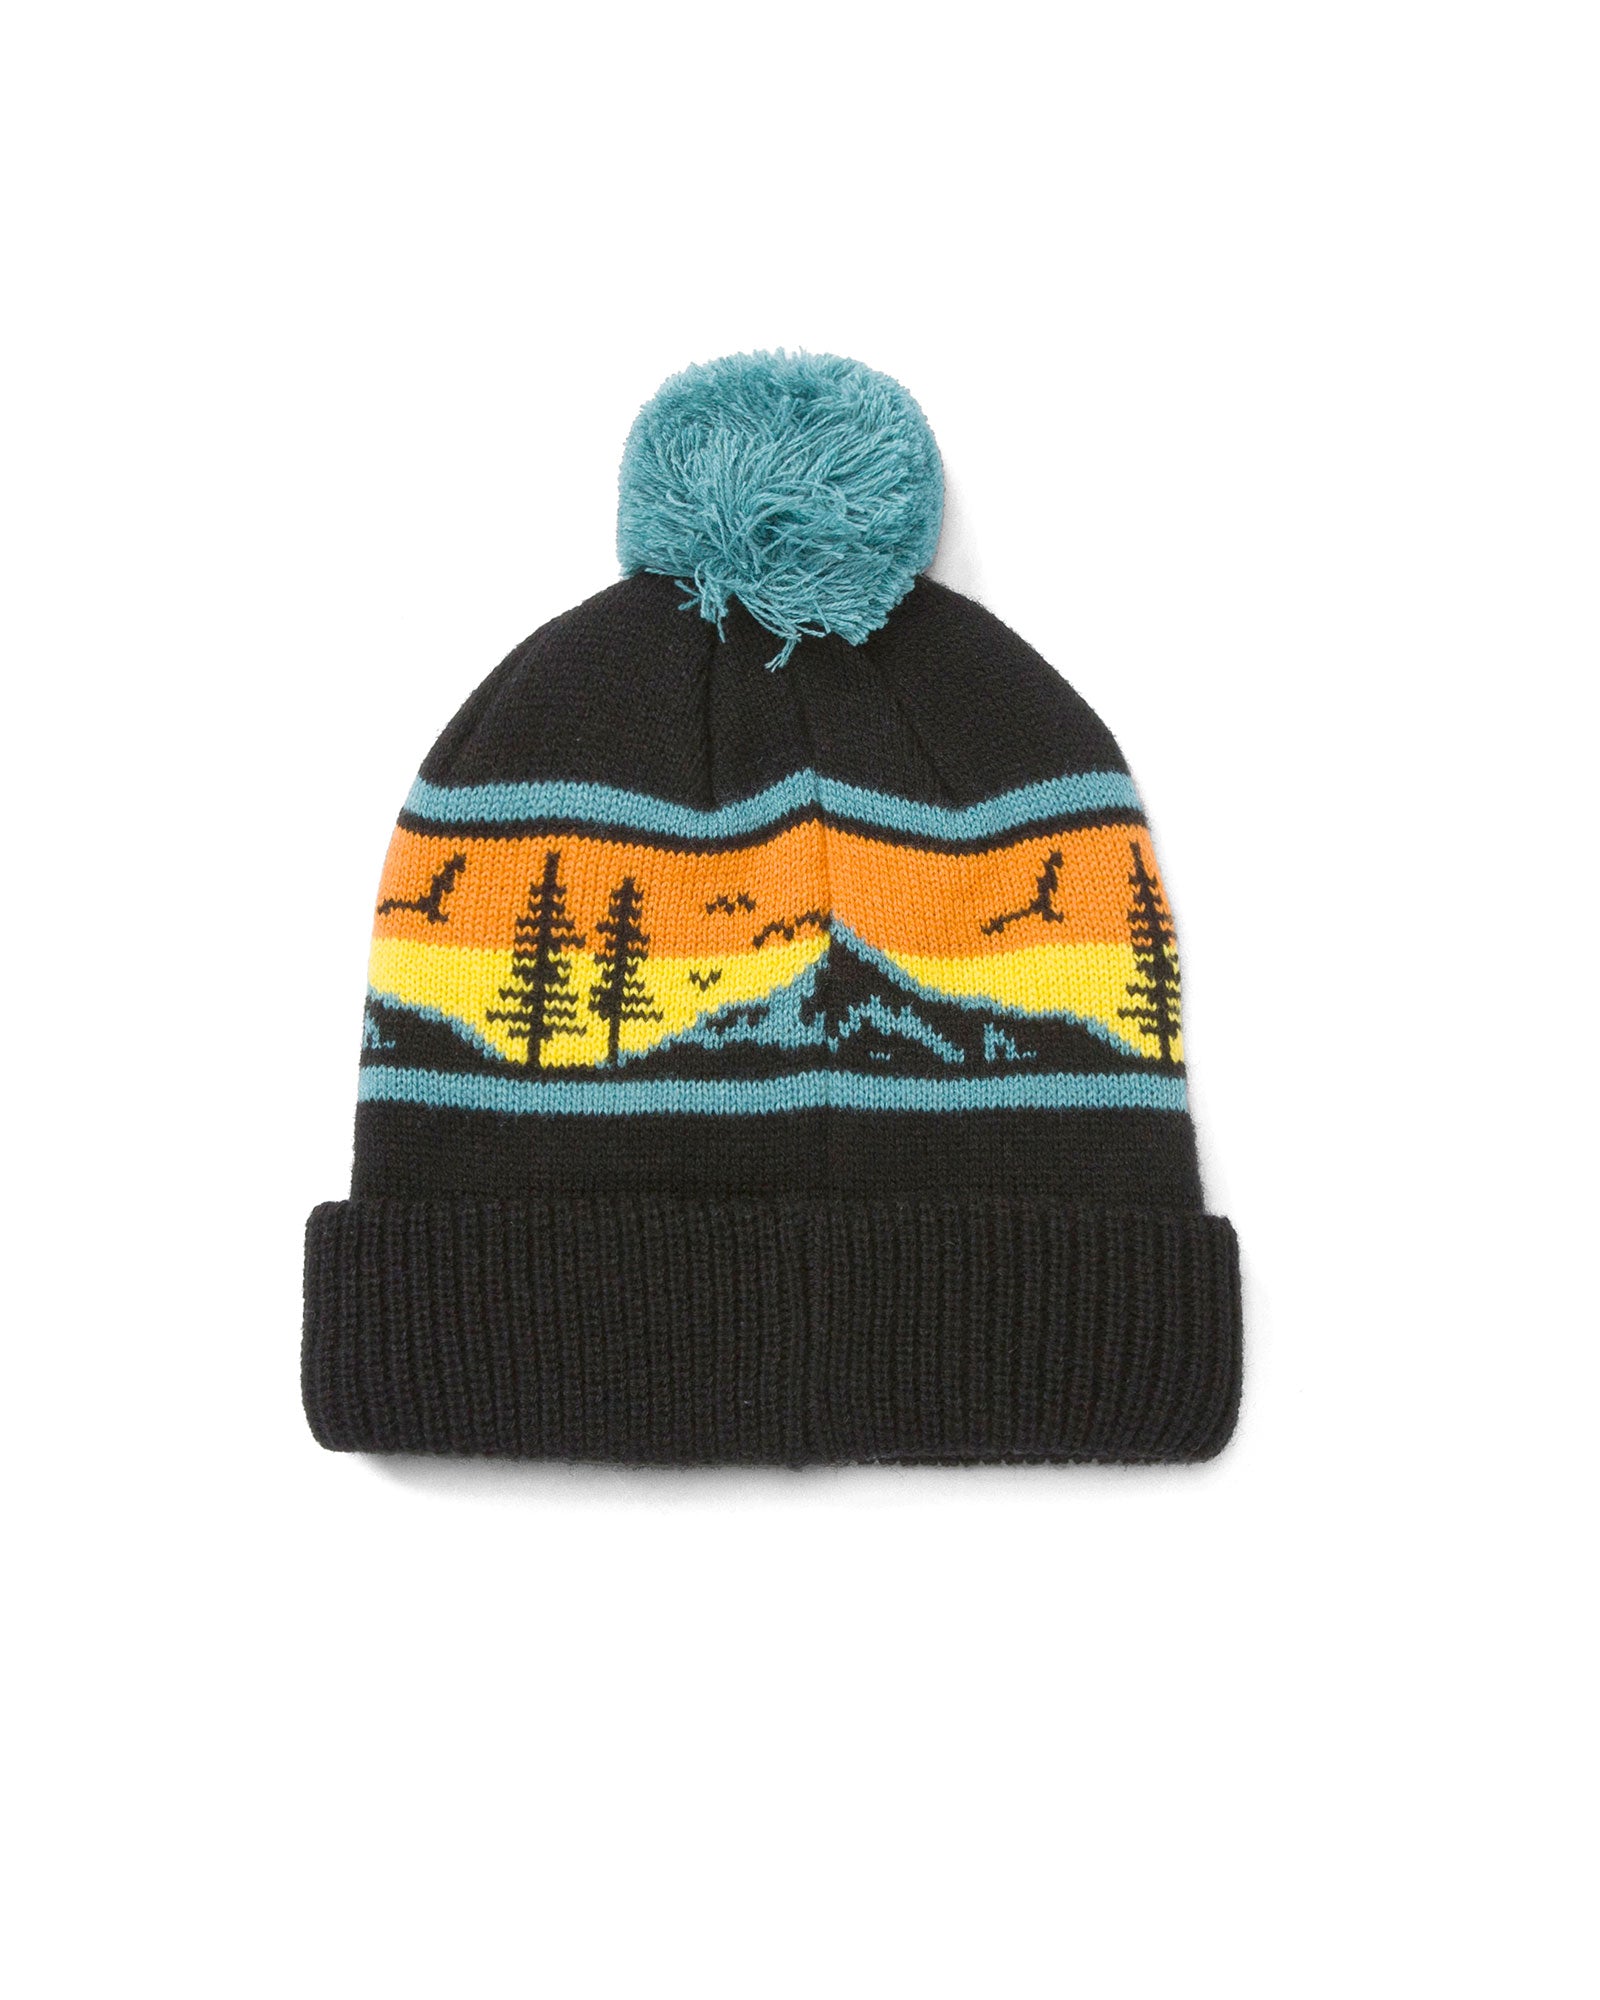 – Spirit Tahoe Beanie Inspired By Tahoe Parks Knitted Project Lake